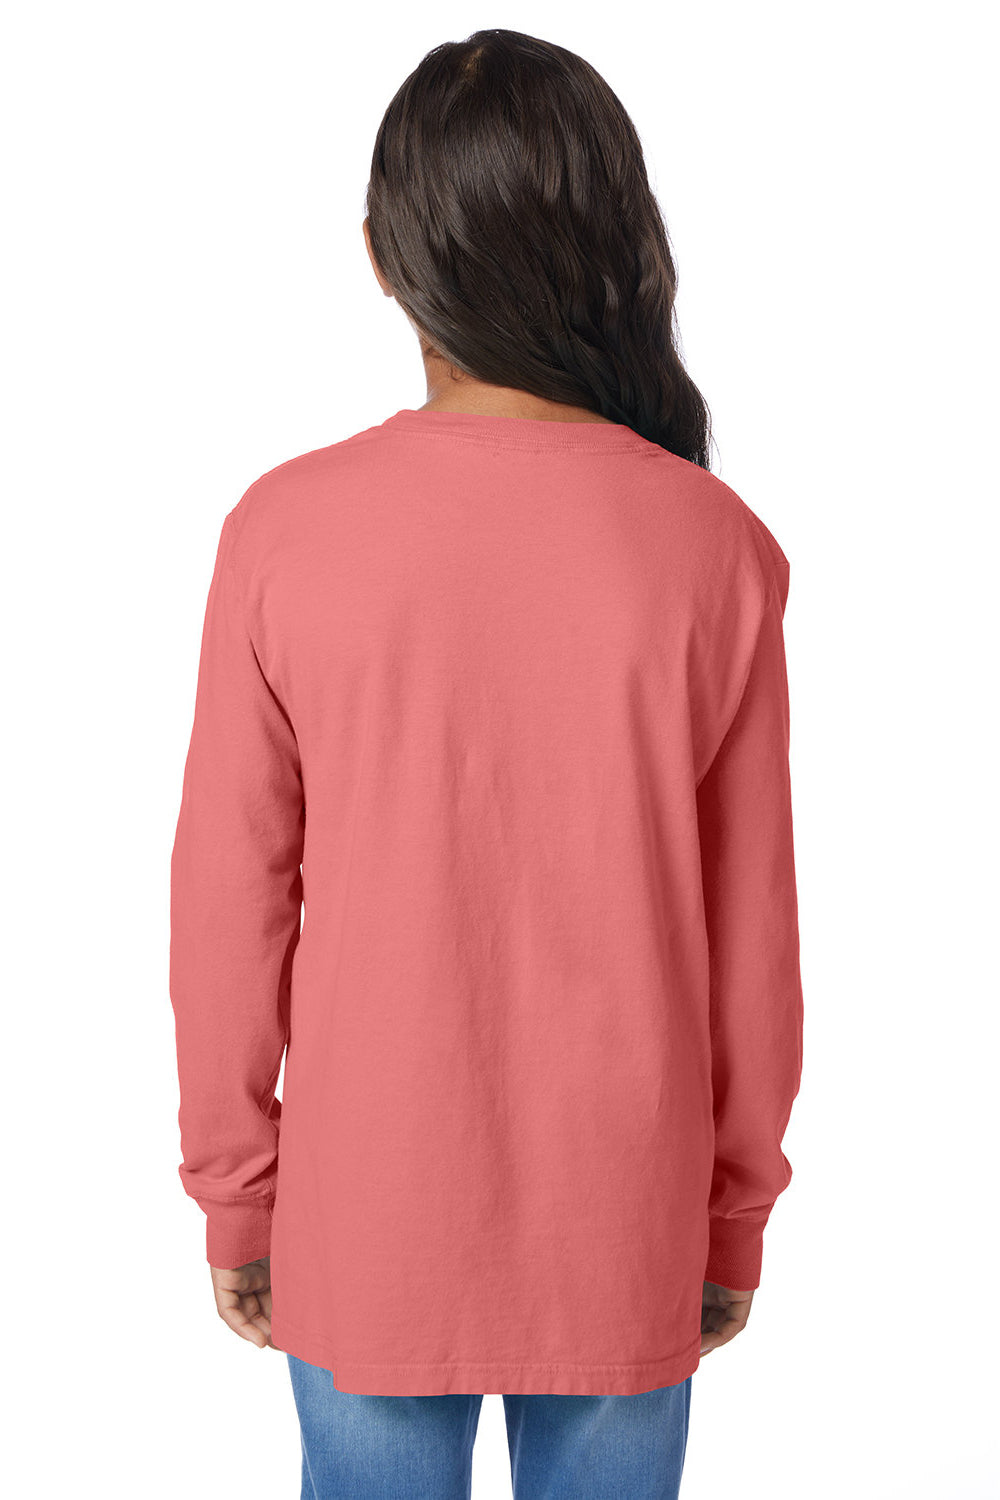 ComfortWash By Hanes GDH275 Youth Garment Dyed Long Sleeve Crewneck T-Shirt Coral Craze Model Back